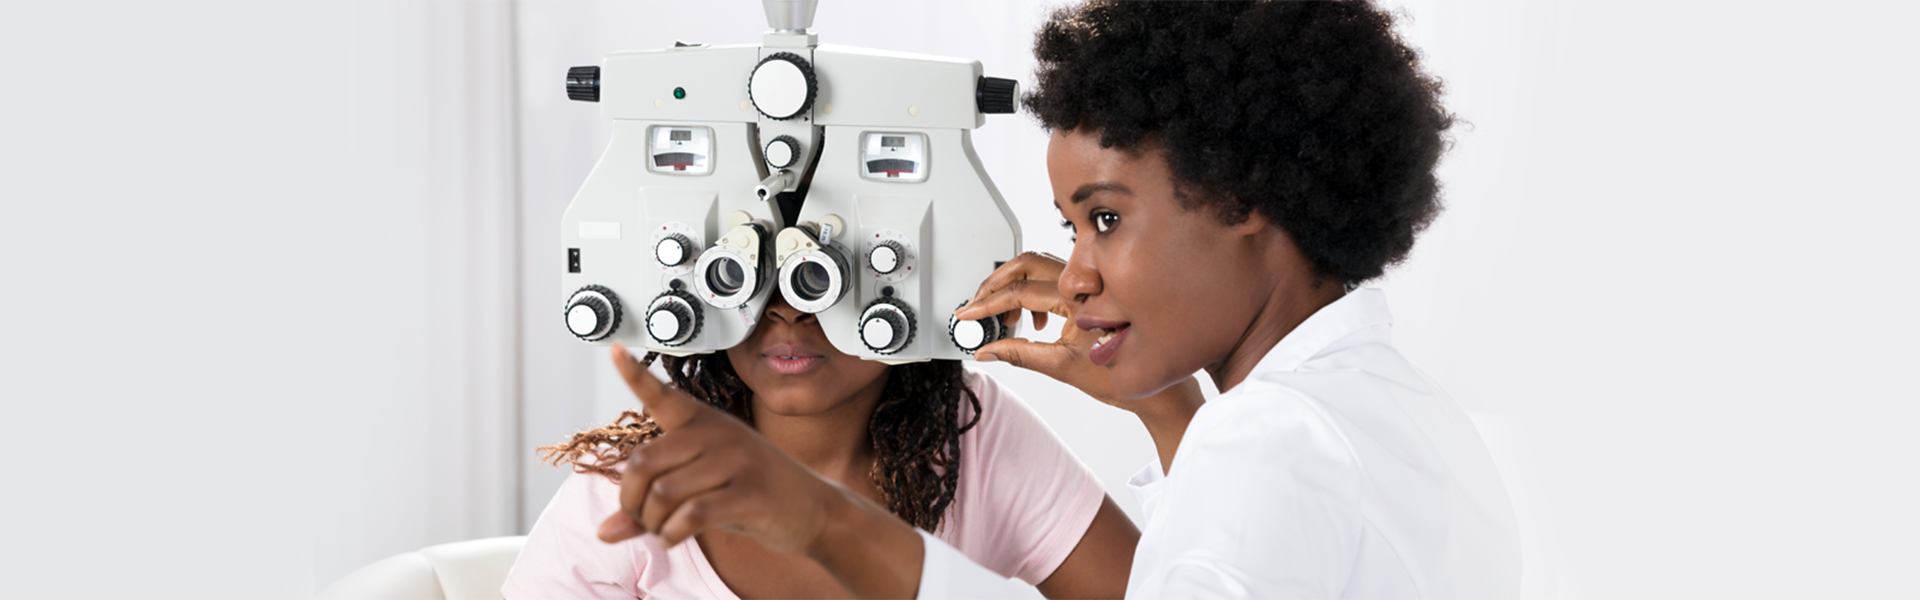 Your eyes are among the significant organs for senses. Therefore, receiving eye care is significant, which includes comprehensive eye exams.